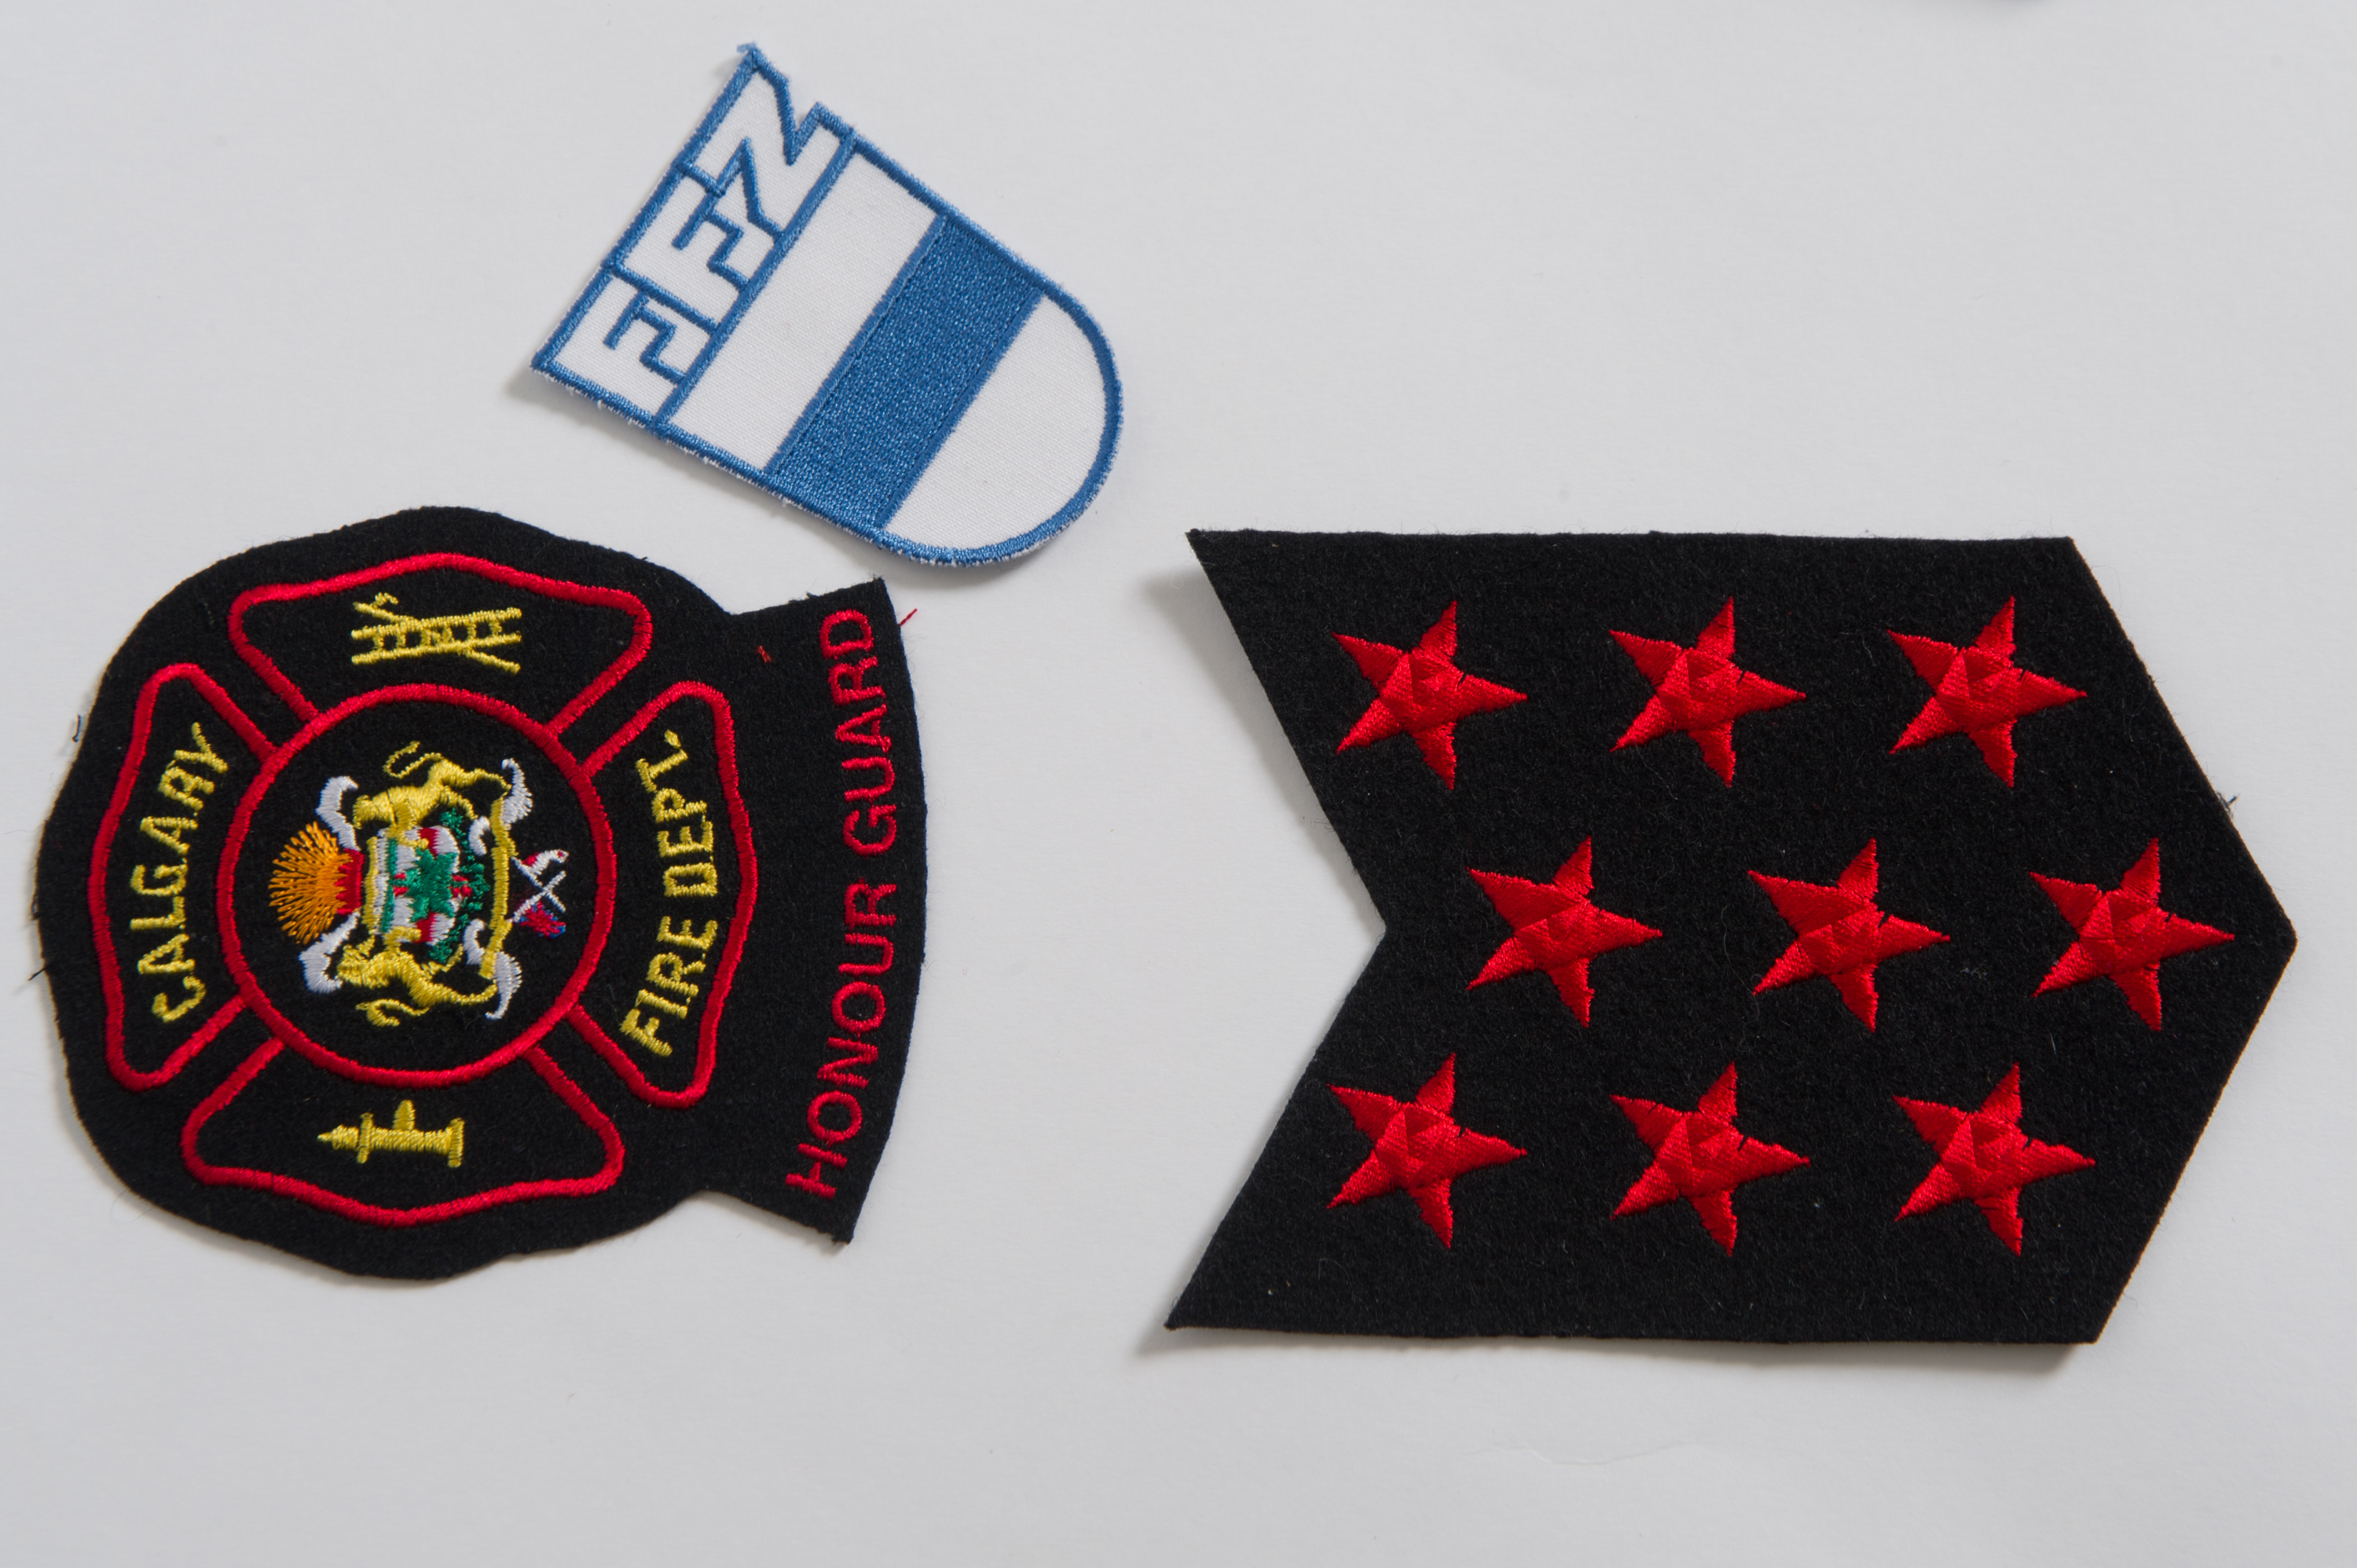 Three patches are shown- the CFD crest with city of Calgary logo, the 9 red stars, and a blue and white patch with FFZ, from Switzerland.